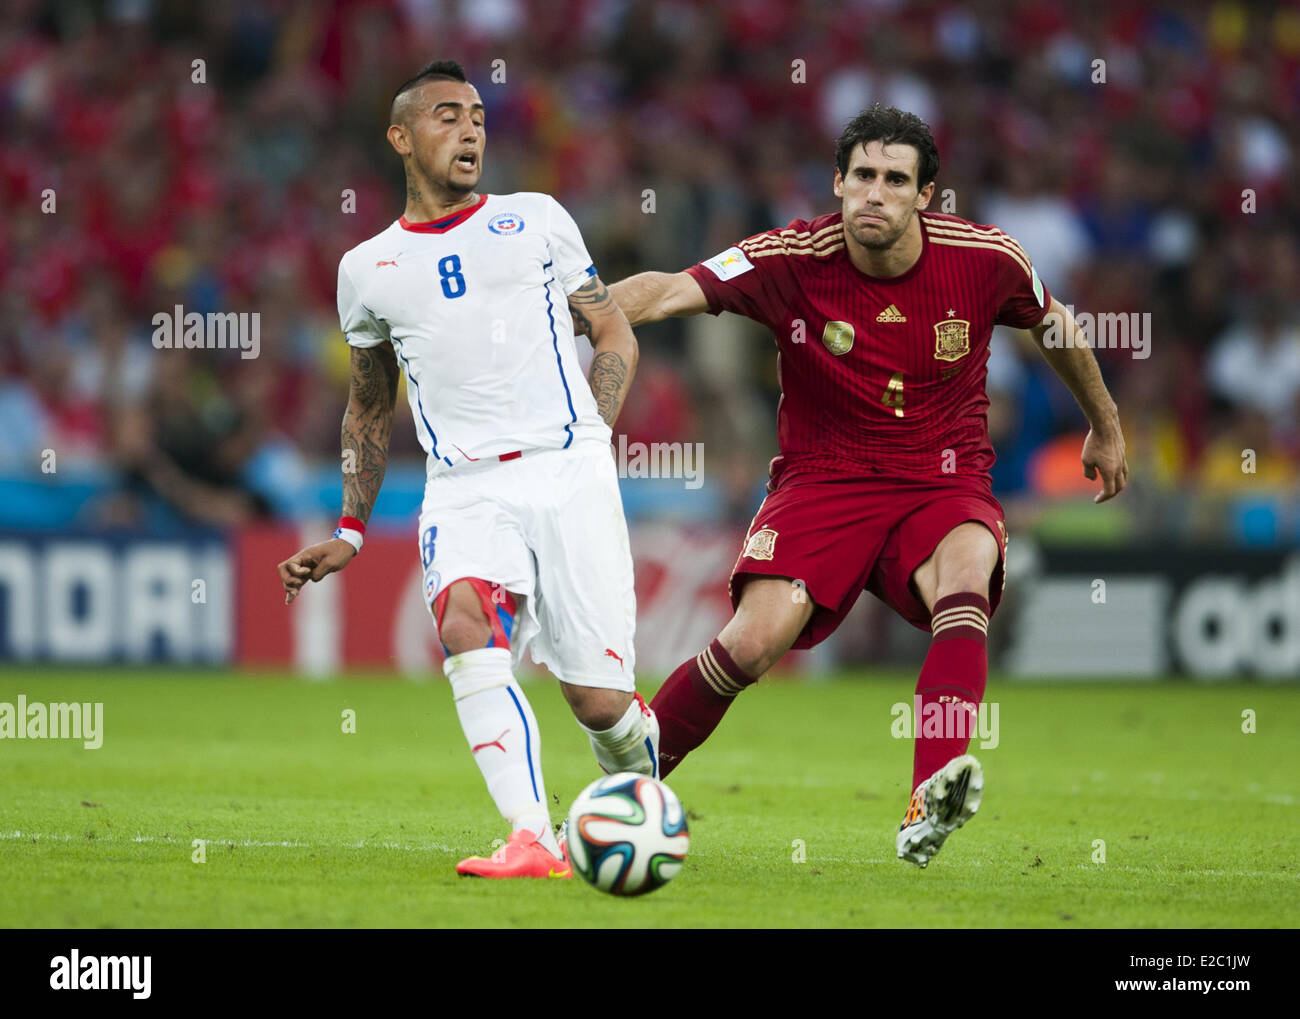 Porto Alegre, Brazil. 18th June, 2014.  Arturo Vidal and Javi Martinez in the match between Spain and Chile in the group stage of the 2014 World Cup, for the group B match at the Beira Rio stadium, on June 18, 2014  Credit:  Urbanandsport/NurPhoto/ZUMAPRESS.com/Alamy Live News Stock Photo